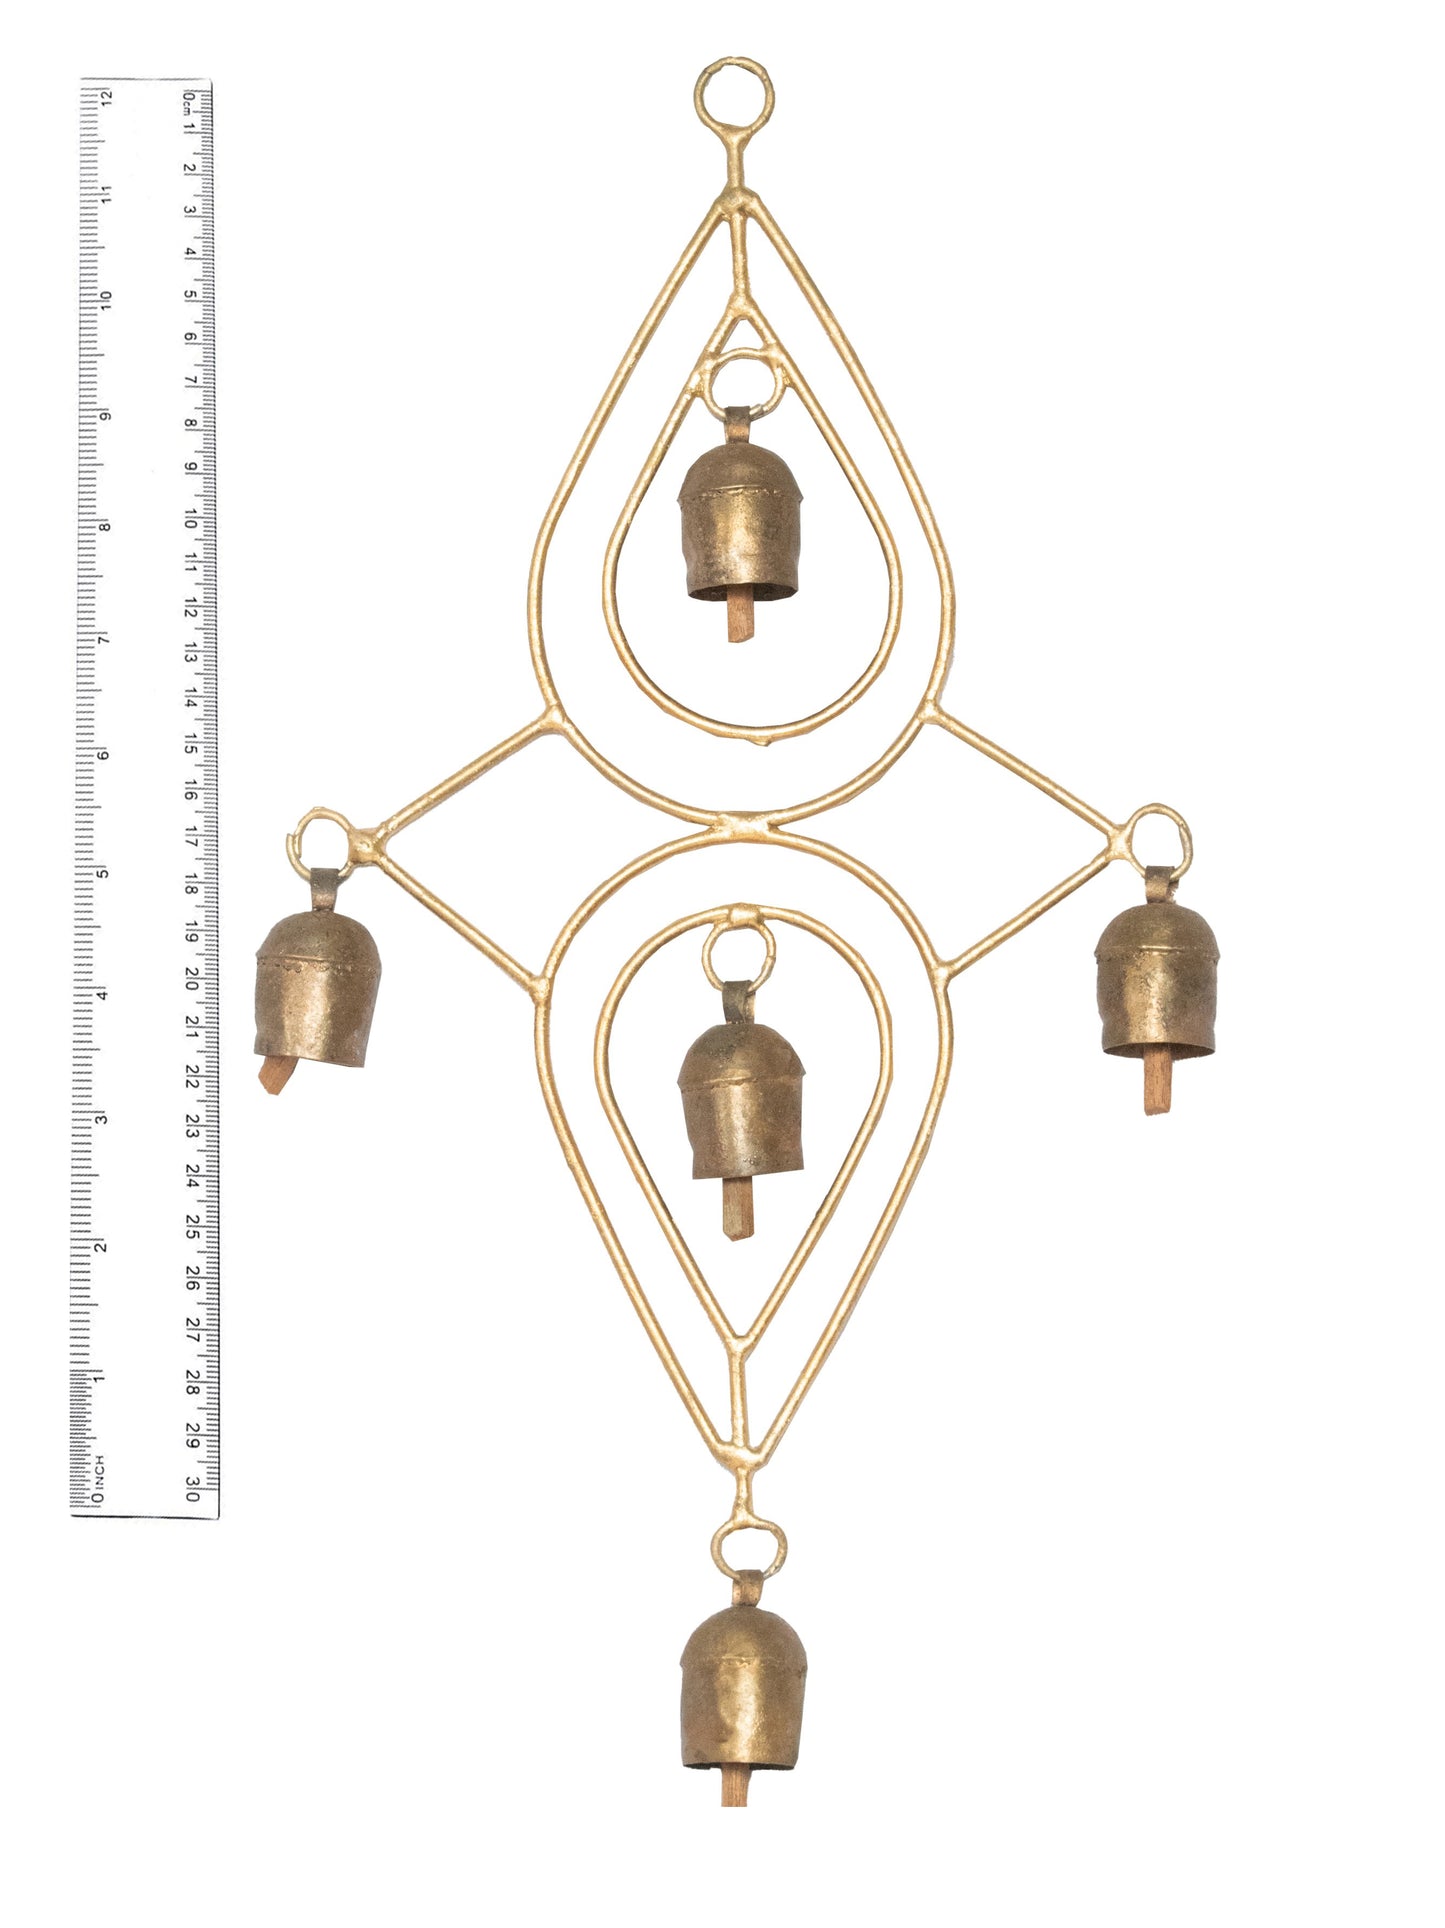 Hand Made Metal Bells Wrought Iron Copper-Zinc Coated Home Décor Chimes Cow Bell   - Double Drop - 5 Bells  -  SKU: 0093